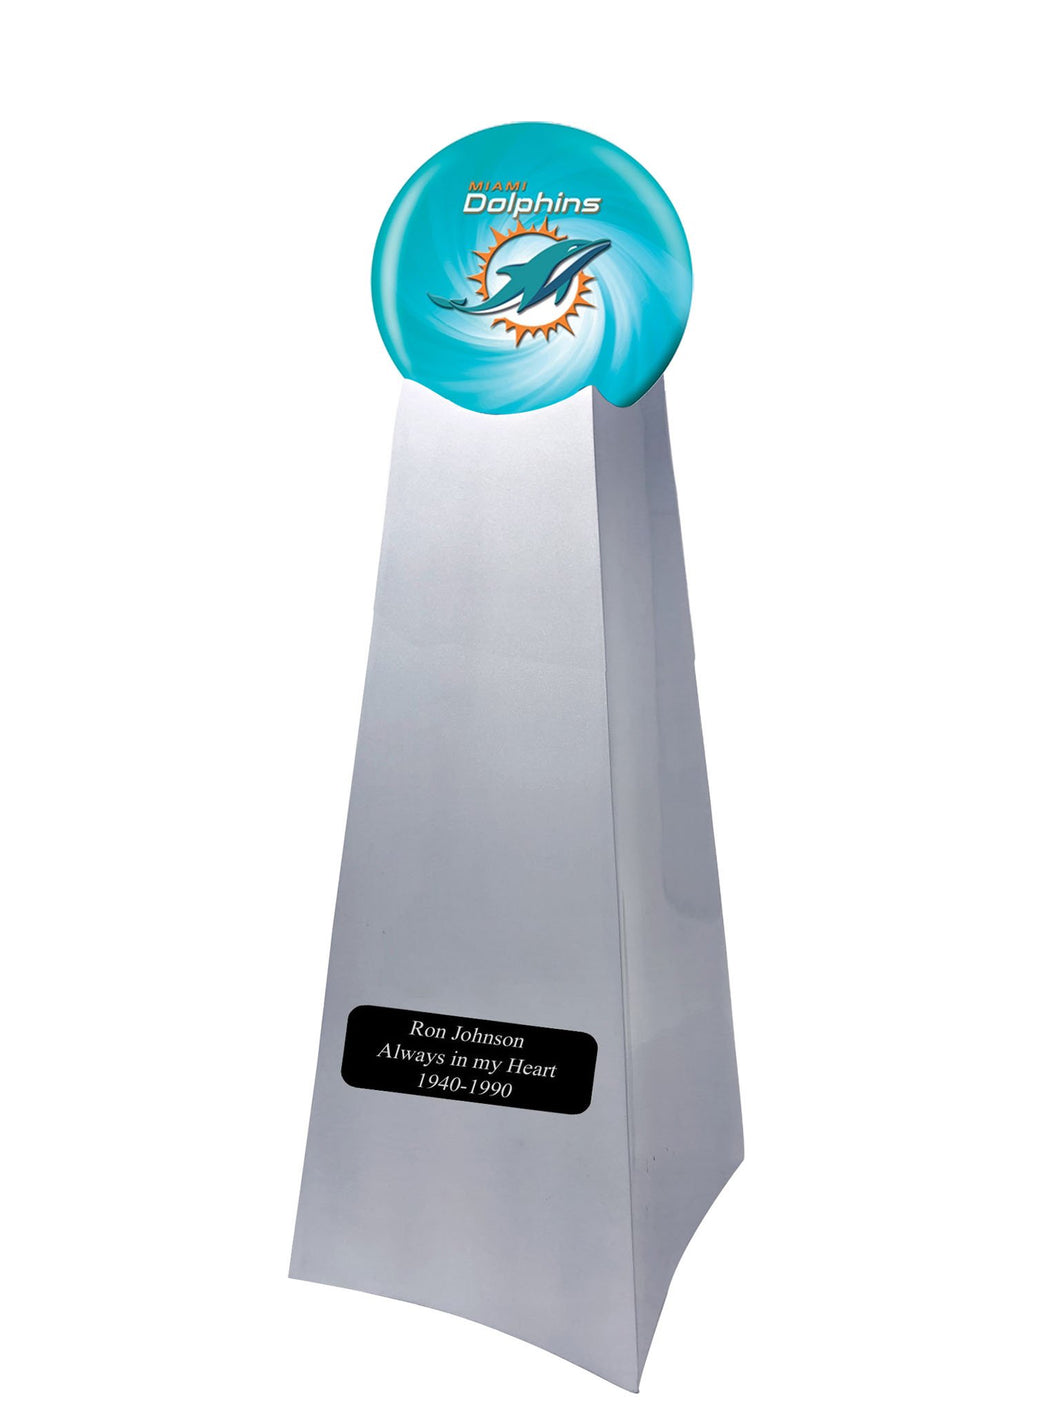 Miami Dolphins Football Championship Trophy Large/Adult Cremation Urn 200 Cubic Inches